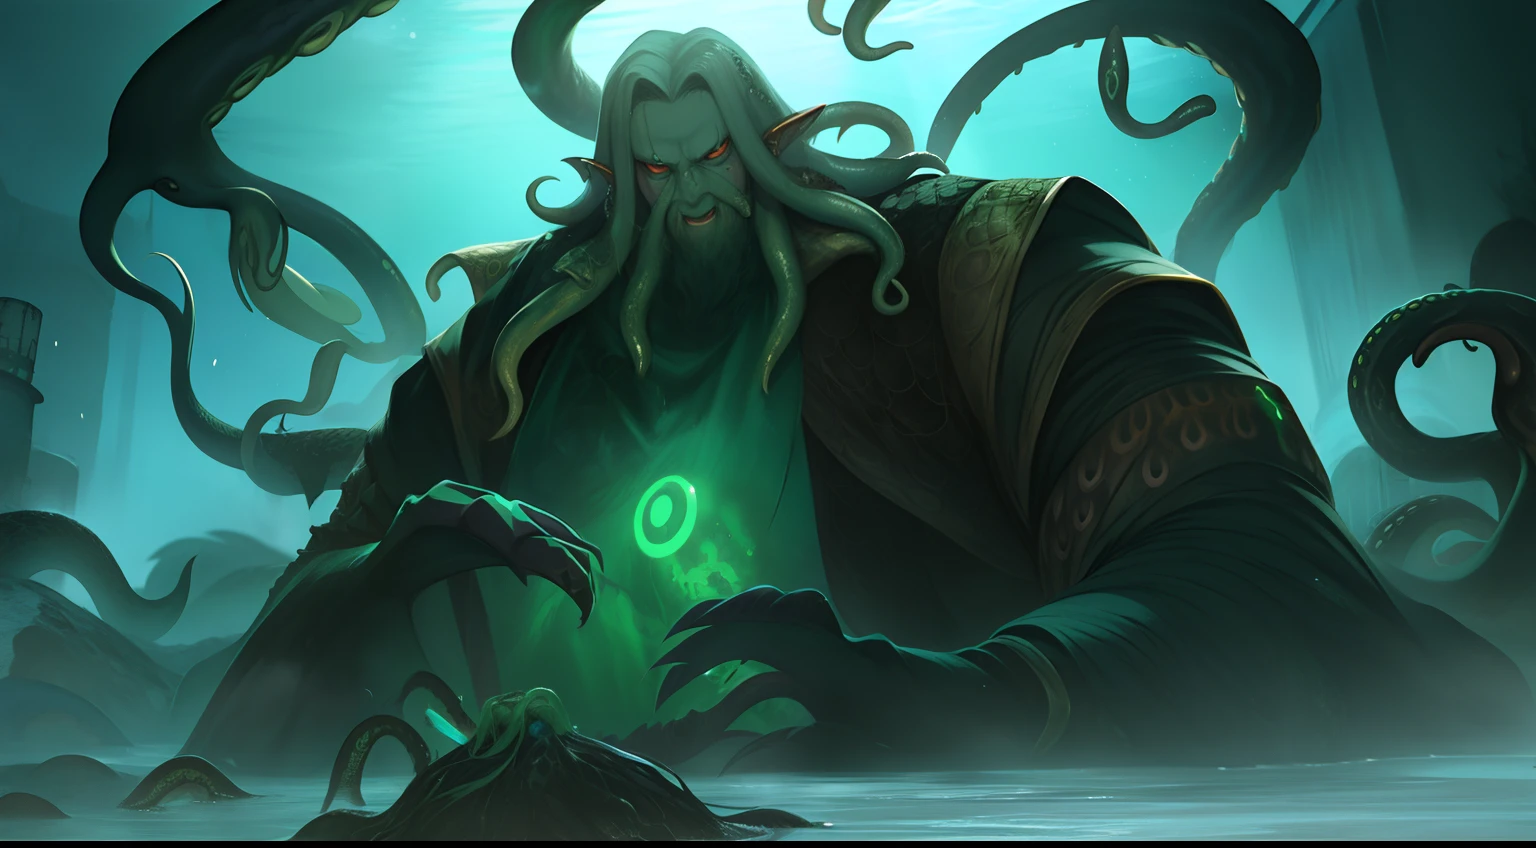 Cthulhu,Monster,(tentaculata:1.35)，A polluted underwater world，Gloomy picture，(Nuclear contamination:1.35)，（face:1.35）,（sarcoma：1.35）